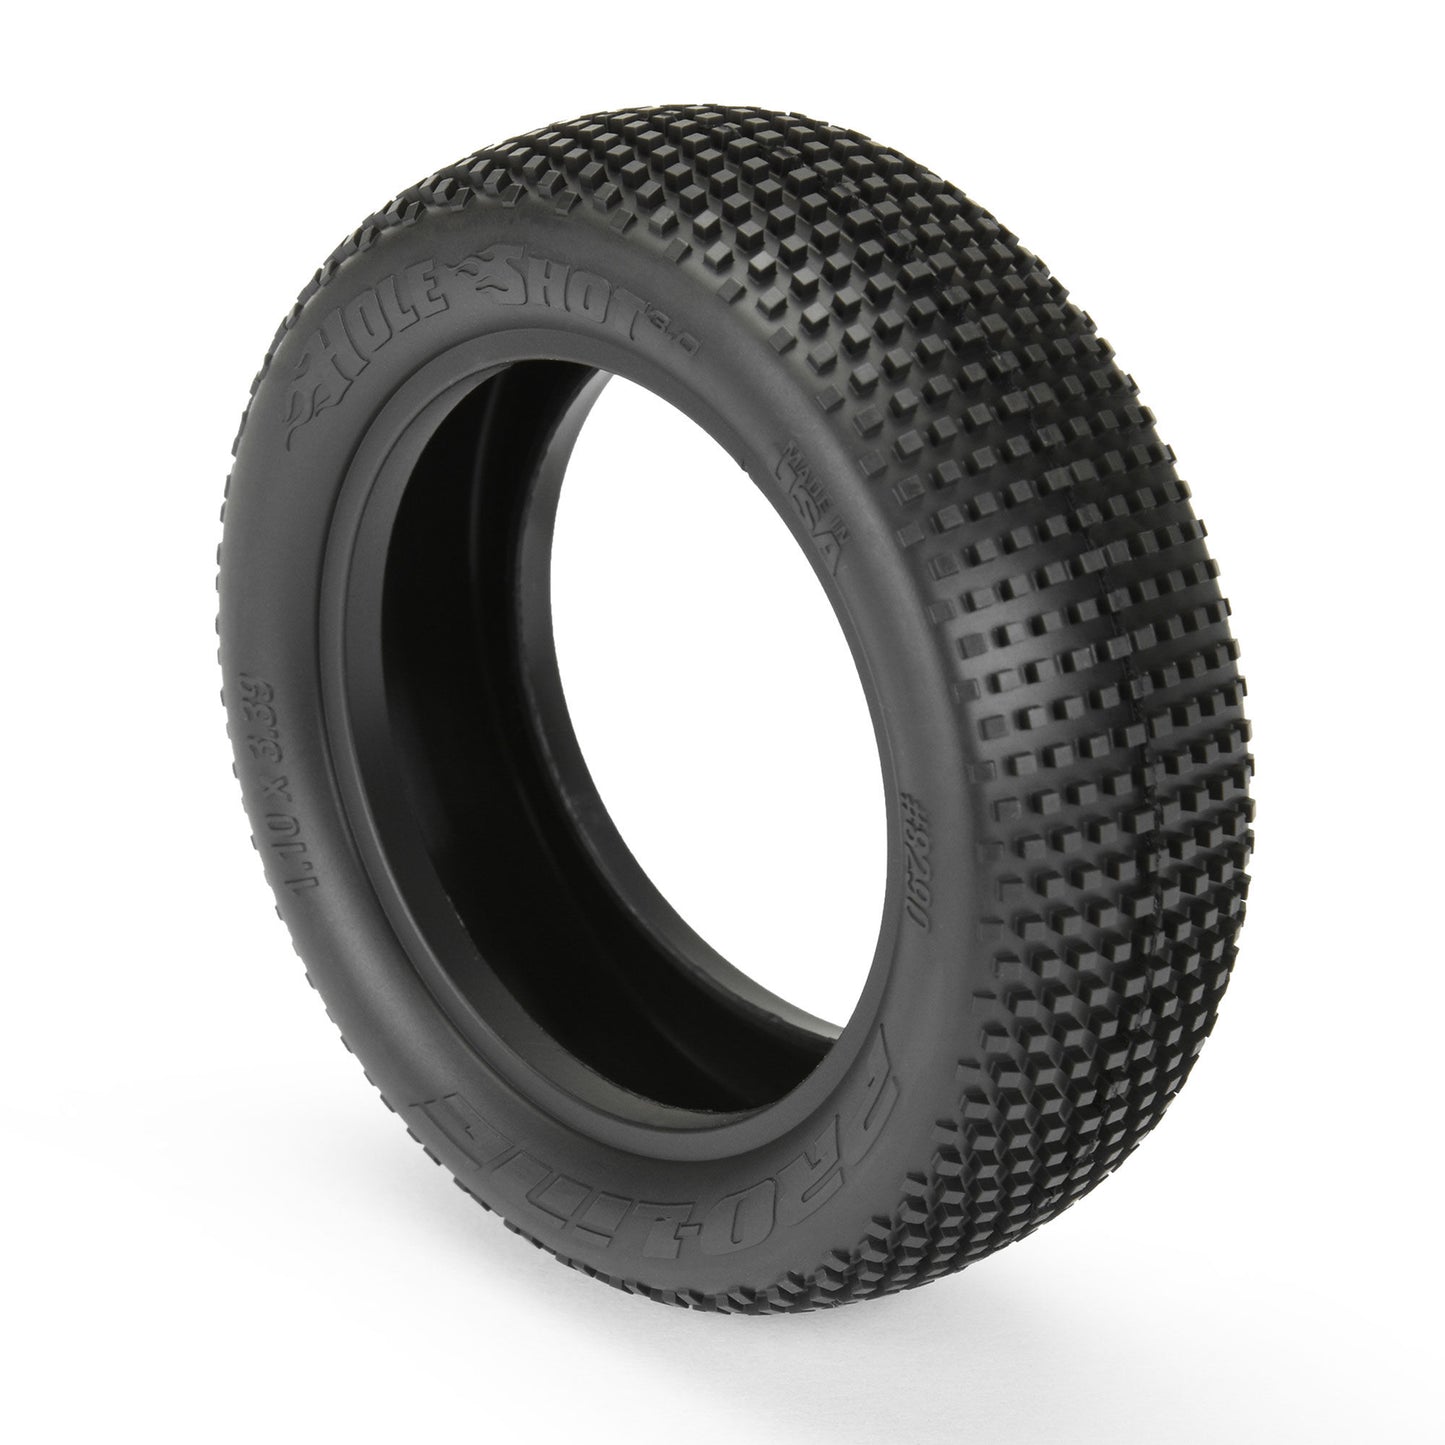 Hole Shot 3.0 2.2 2WD M3 Buggy Front Tires